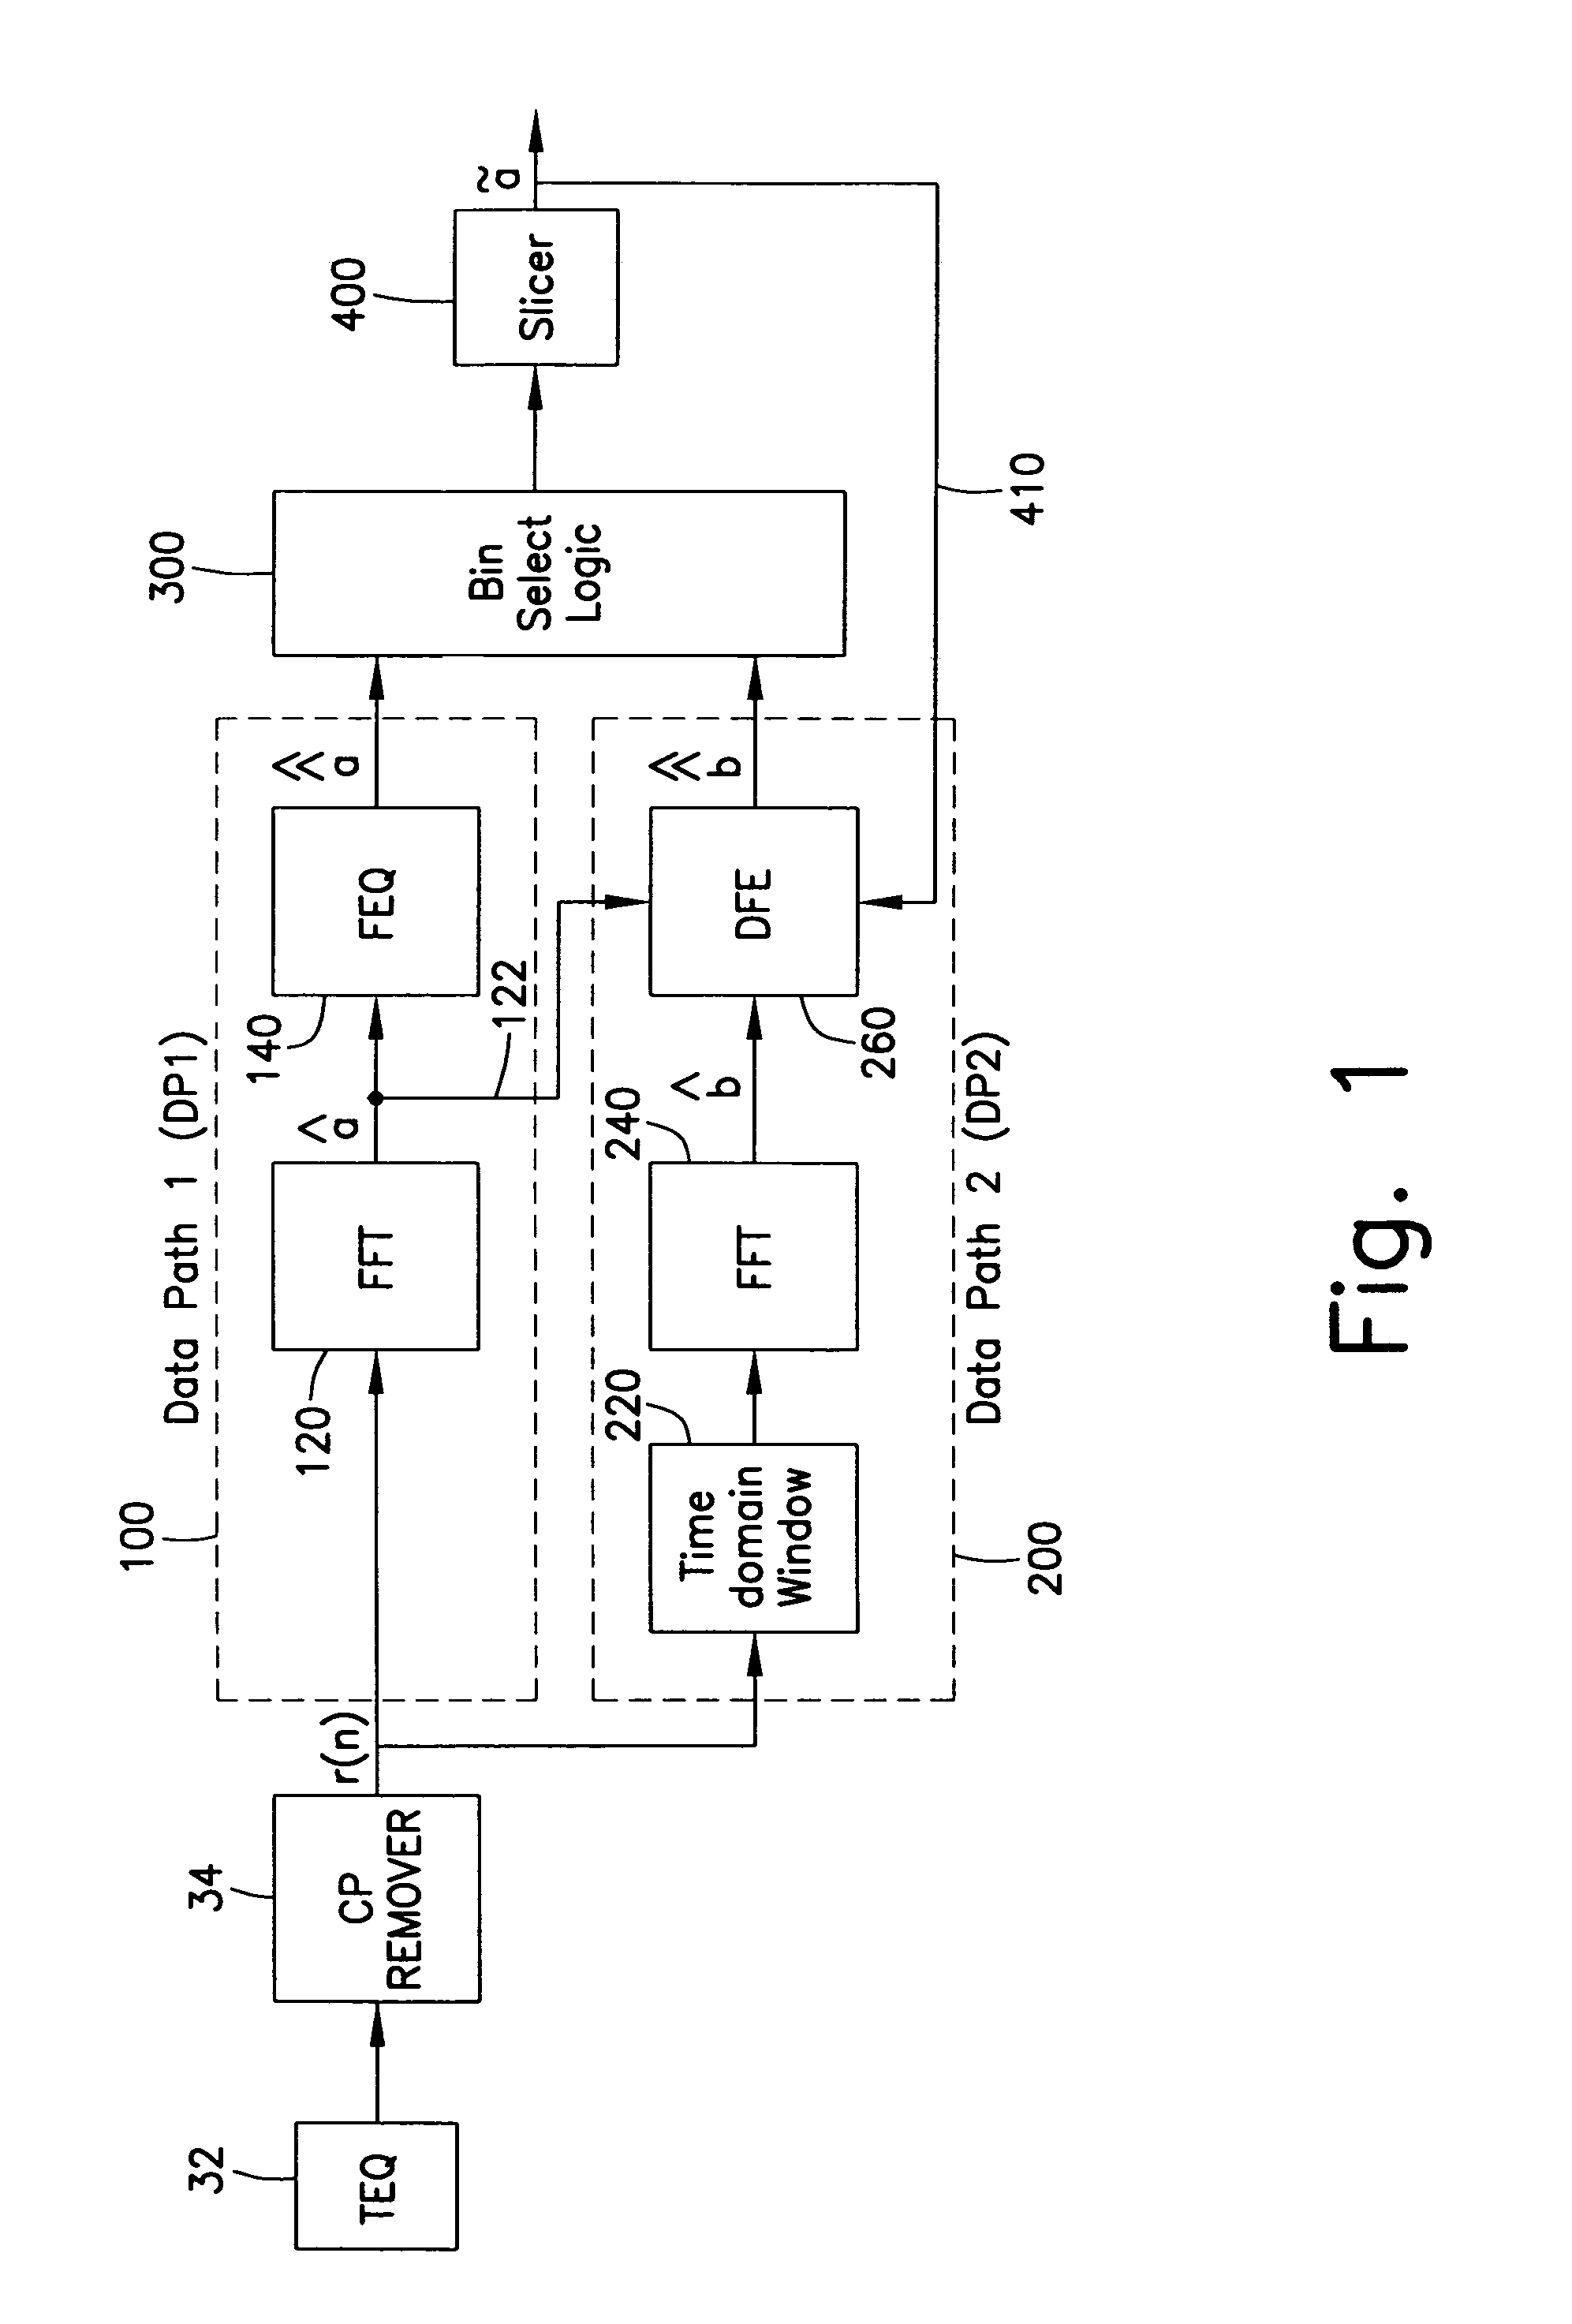 Receiver for discrete multitone modulated signals having window function